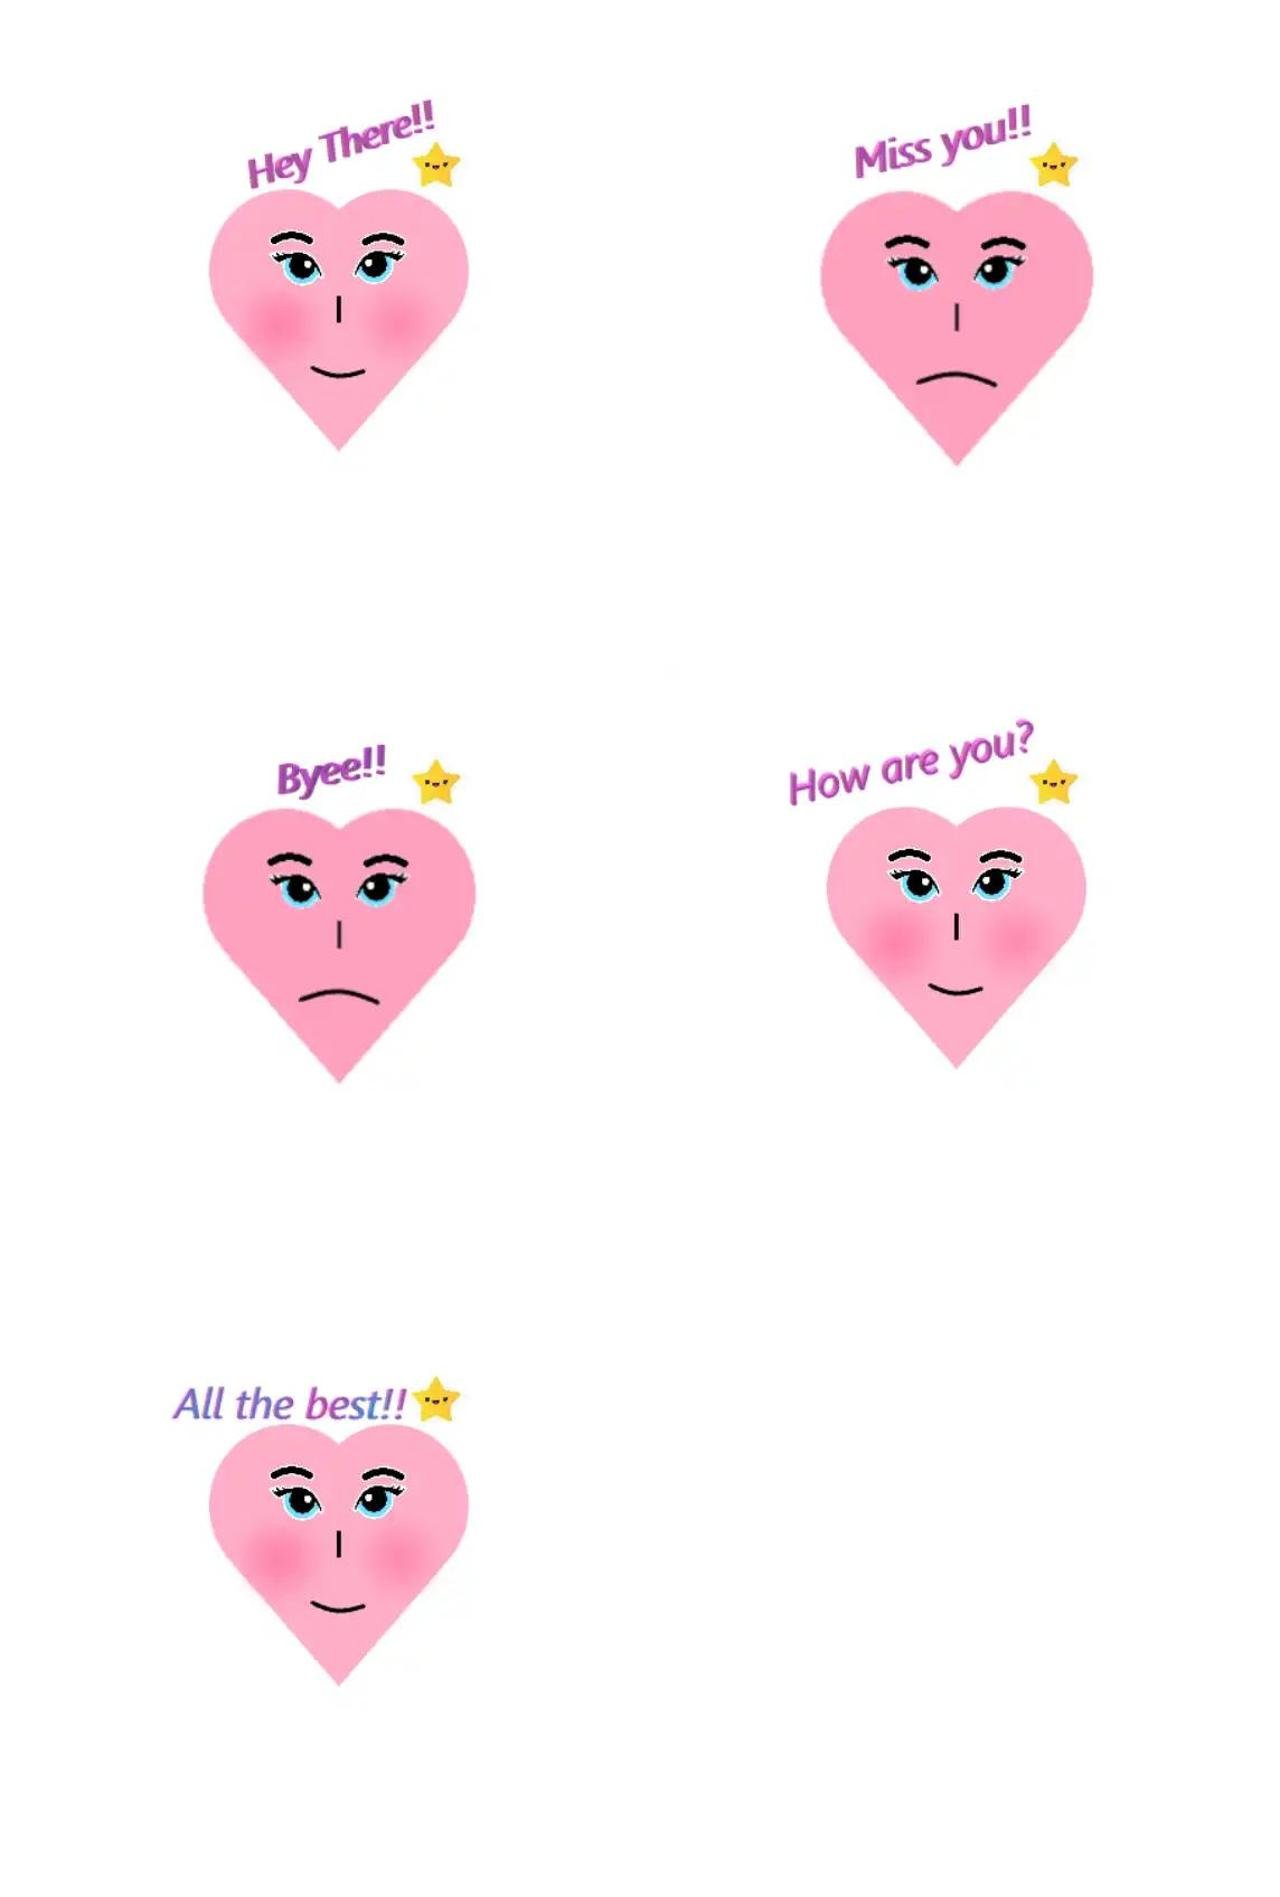 Heart Animation/Cartoon sticker pack for Whatsapp, Telegram, Signal, and others chatting and message apps